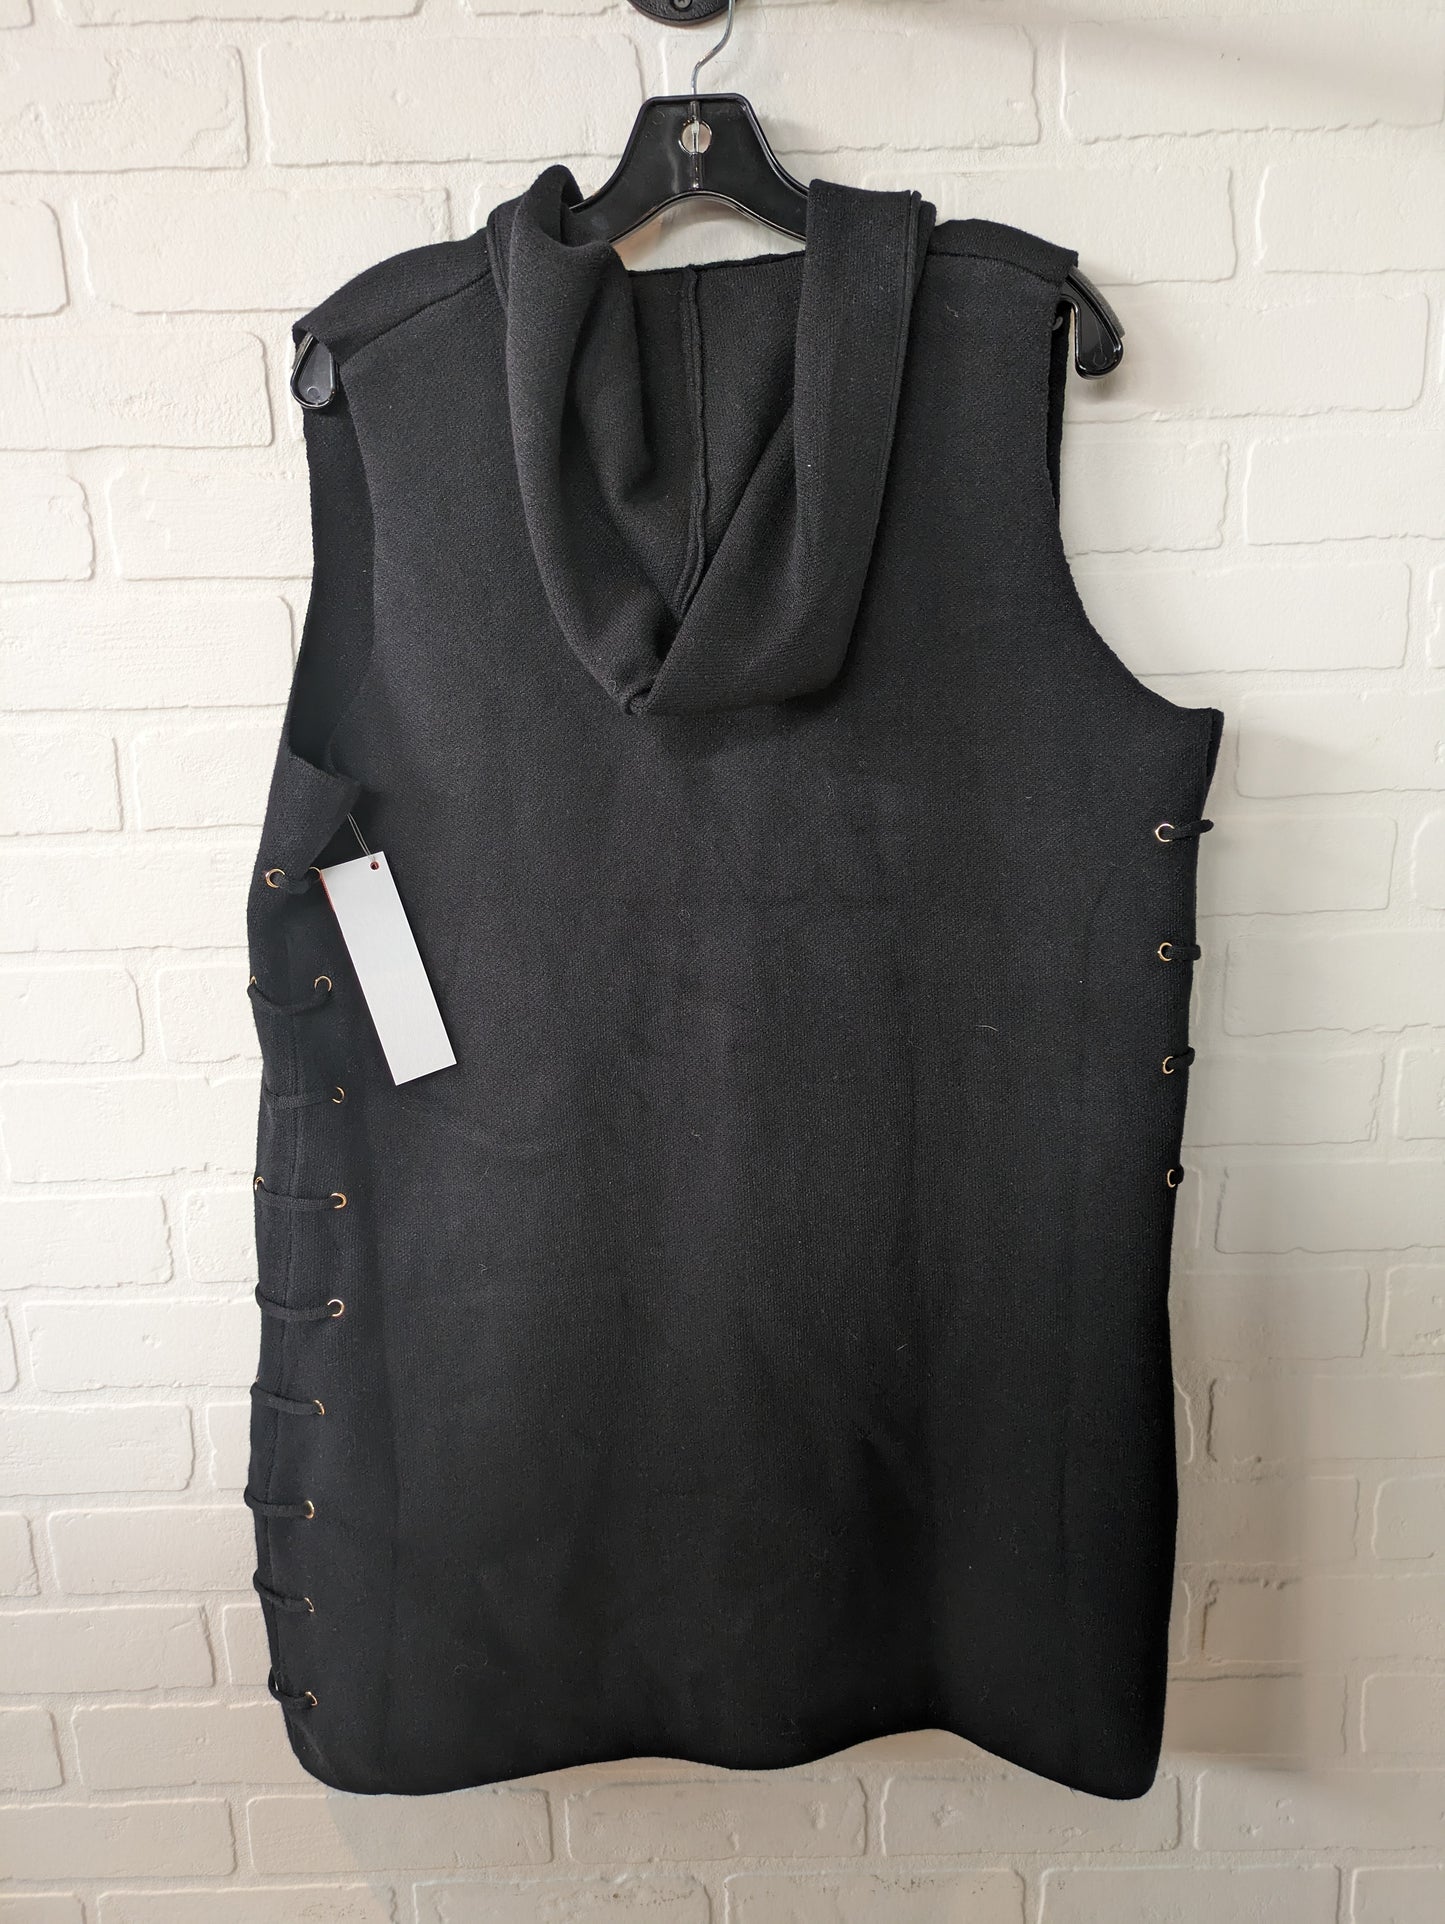 Vest Other By Clothes Mentor  Size: Xl